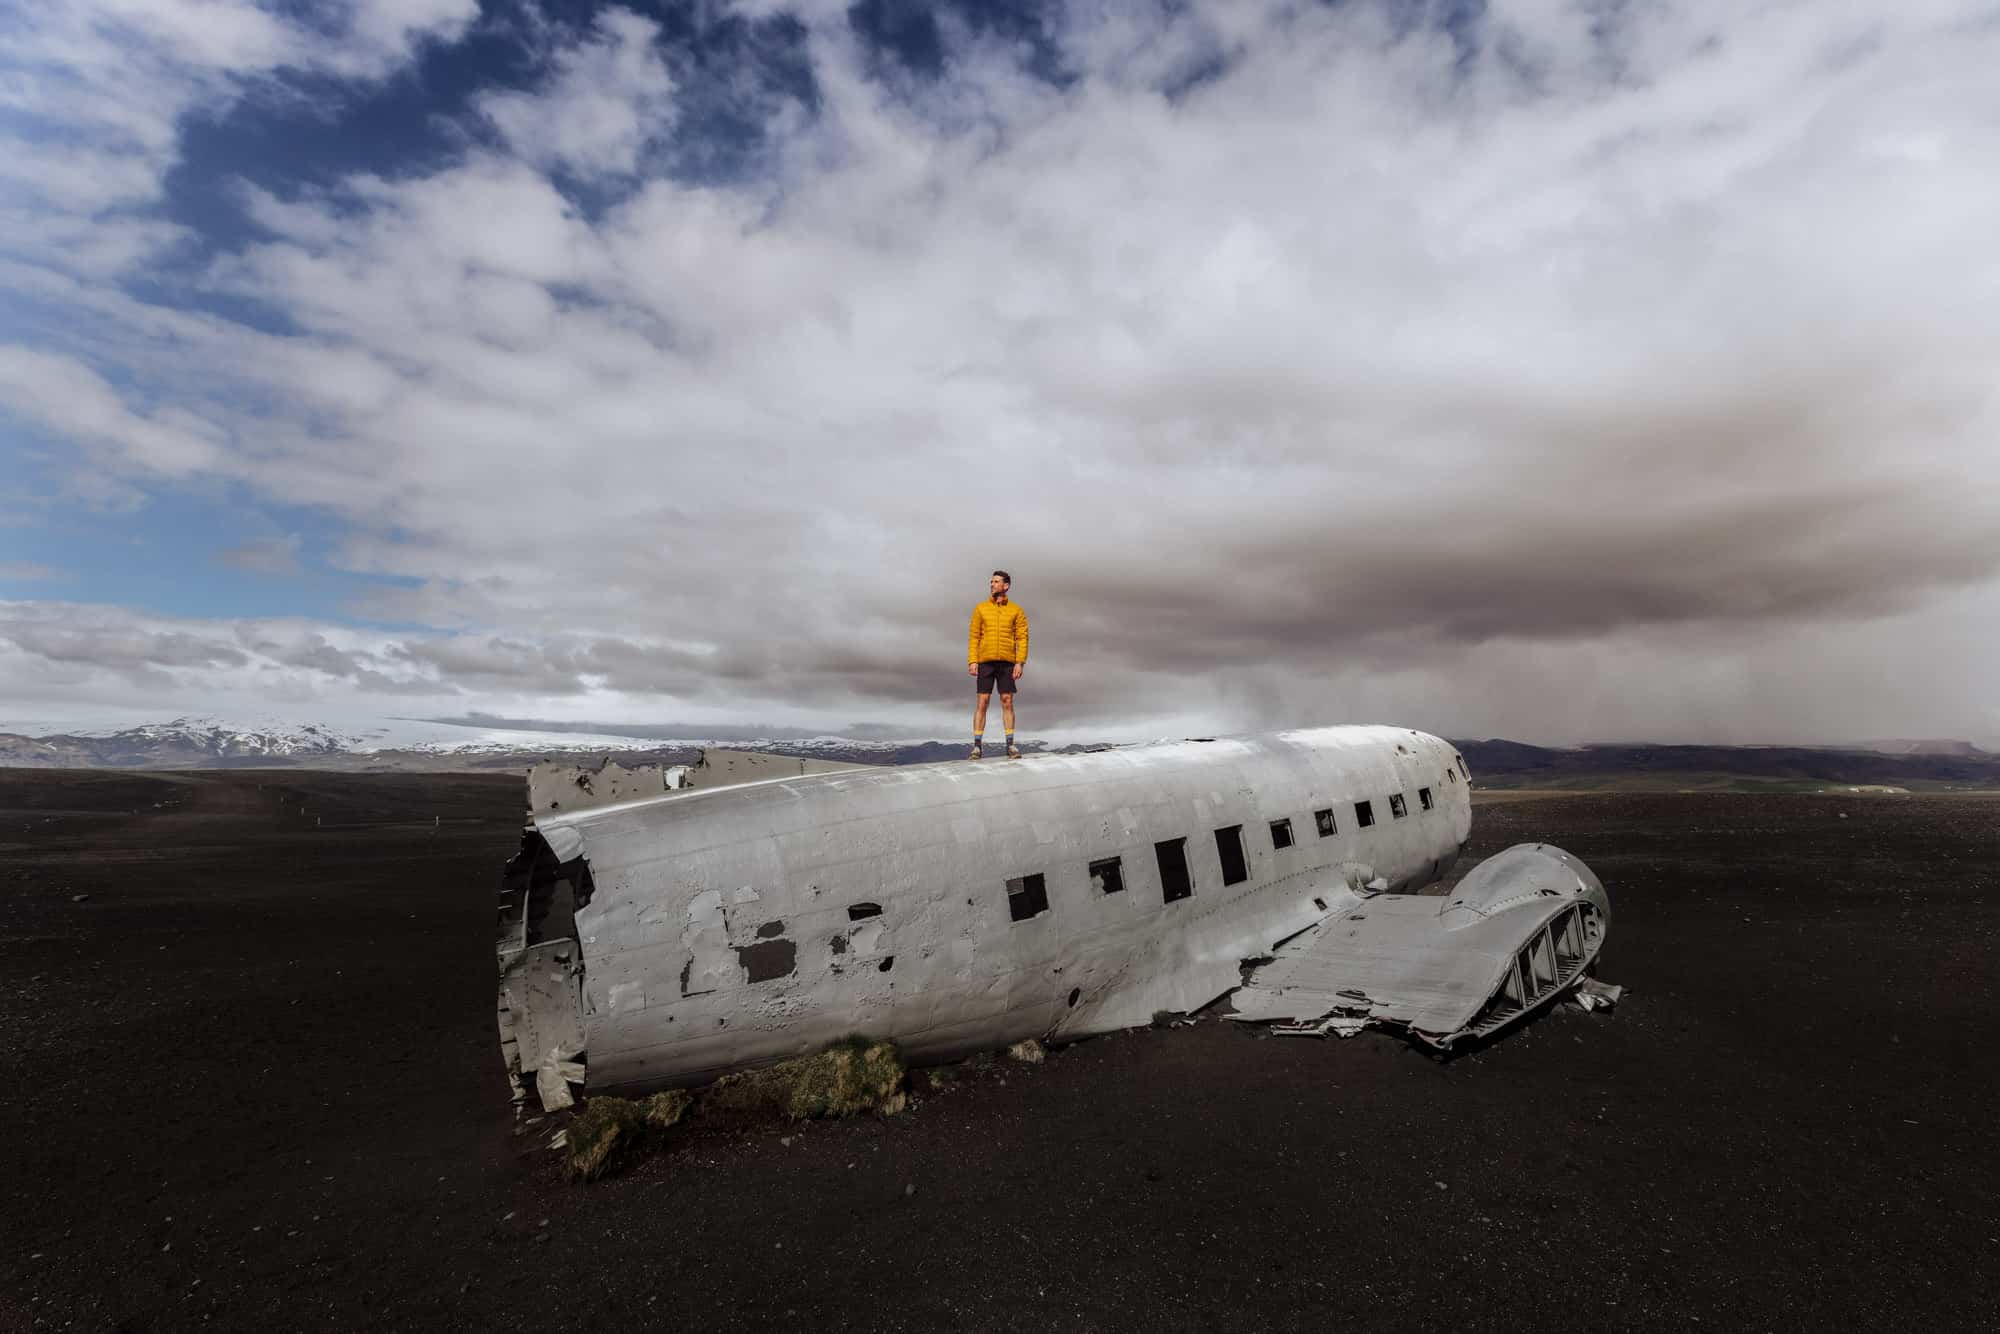 Jared Dillingham at the ICELAND PLANE WRECK